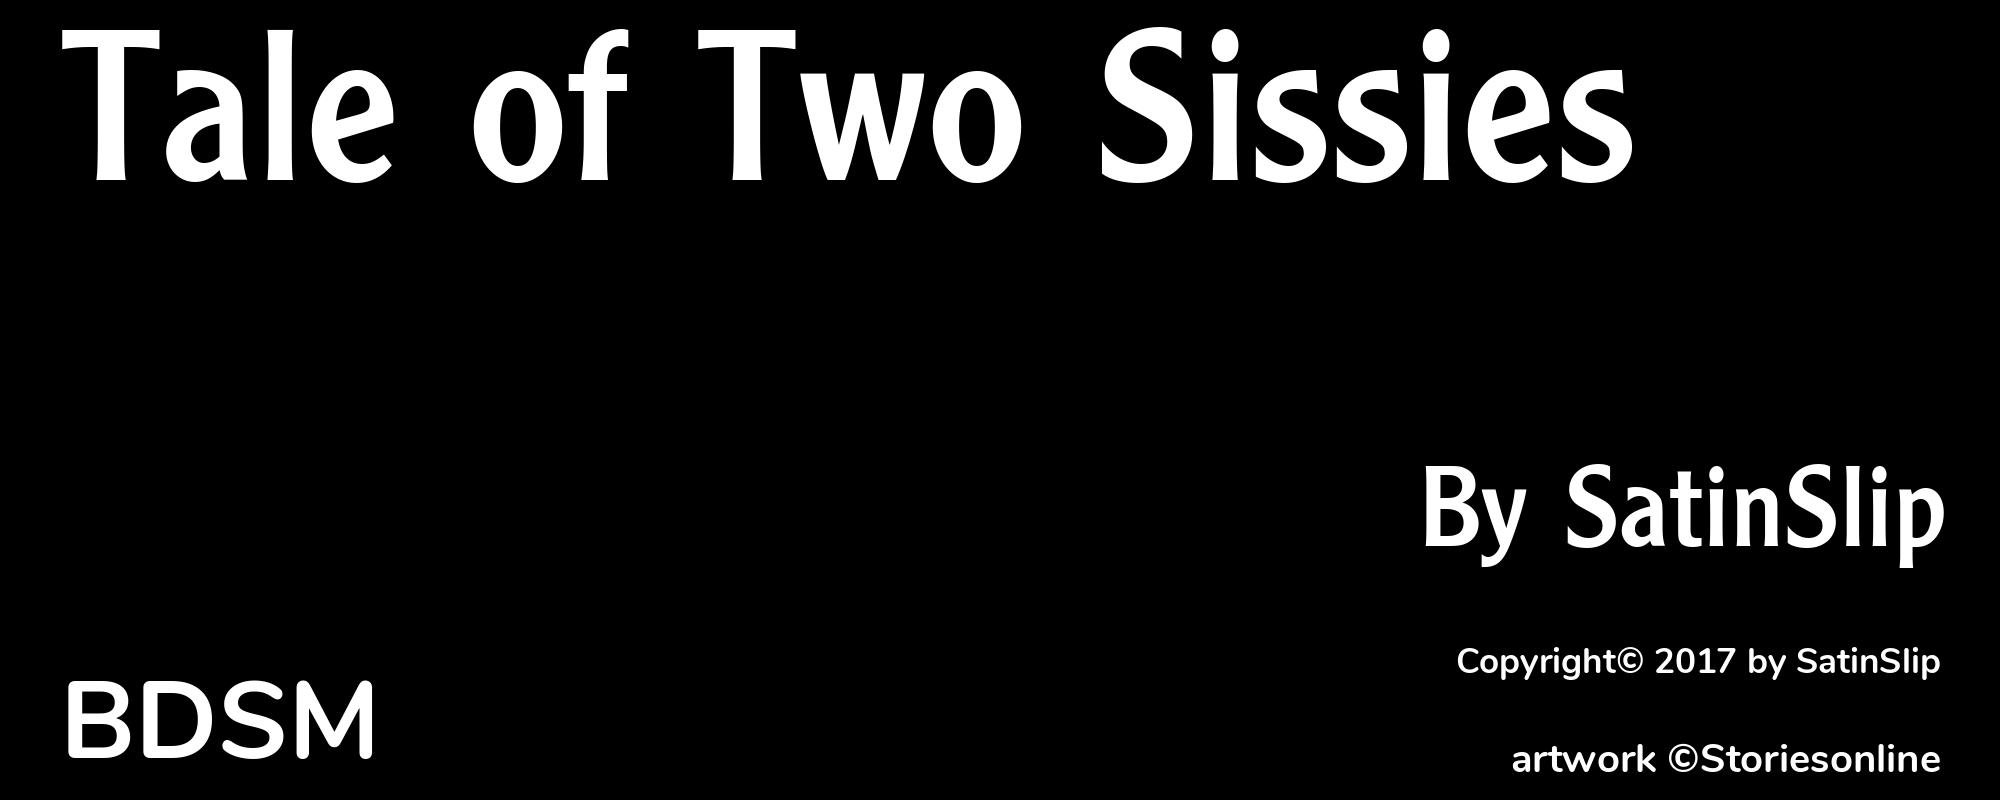 Tale of Two Sissies - Cover